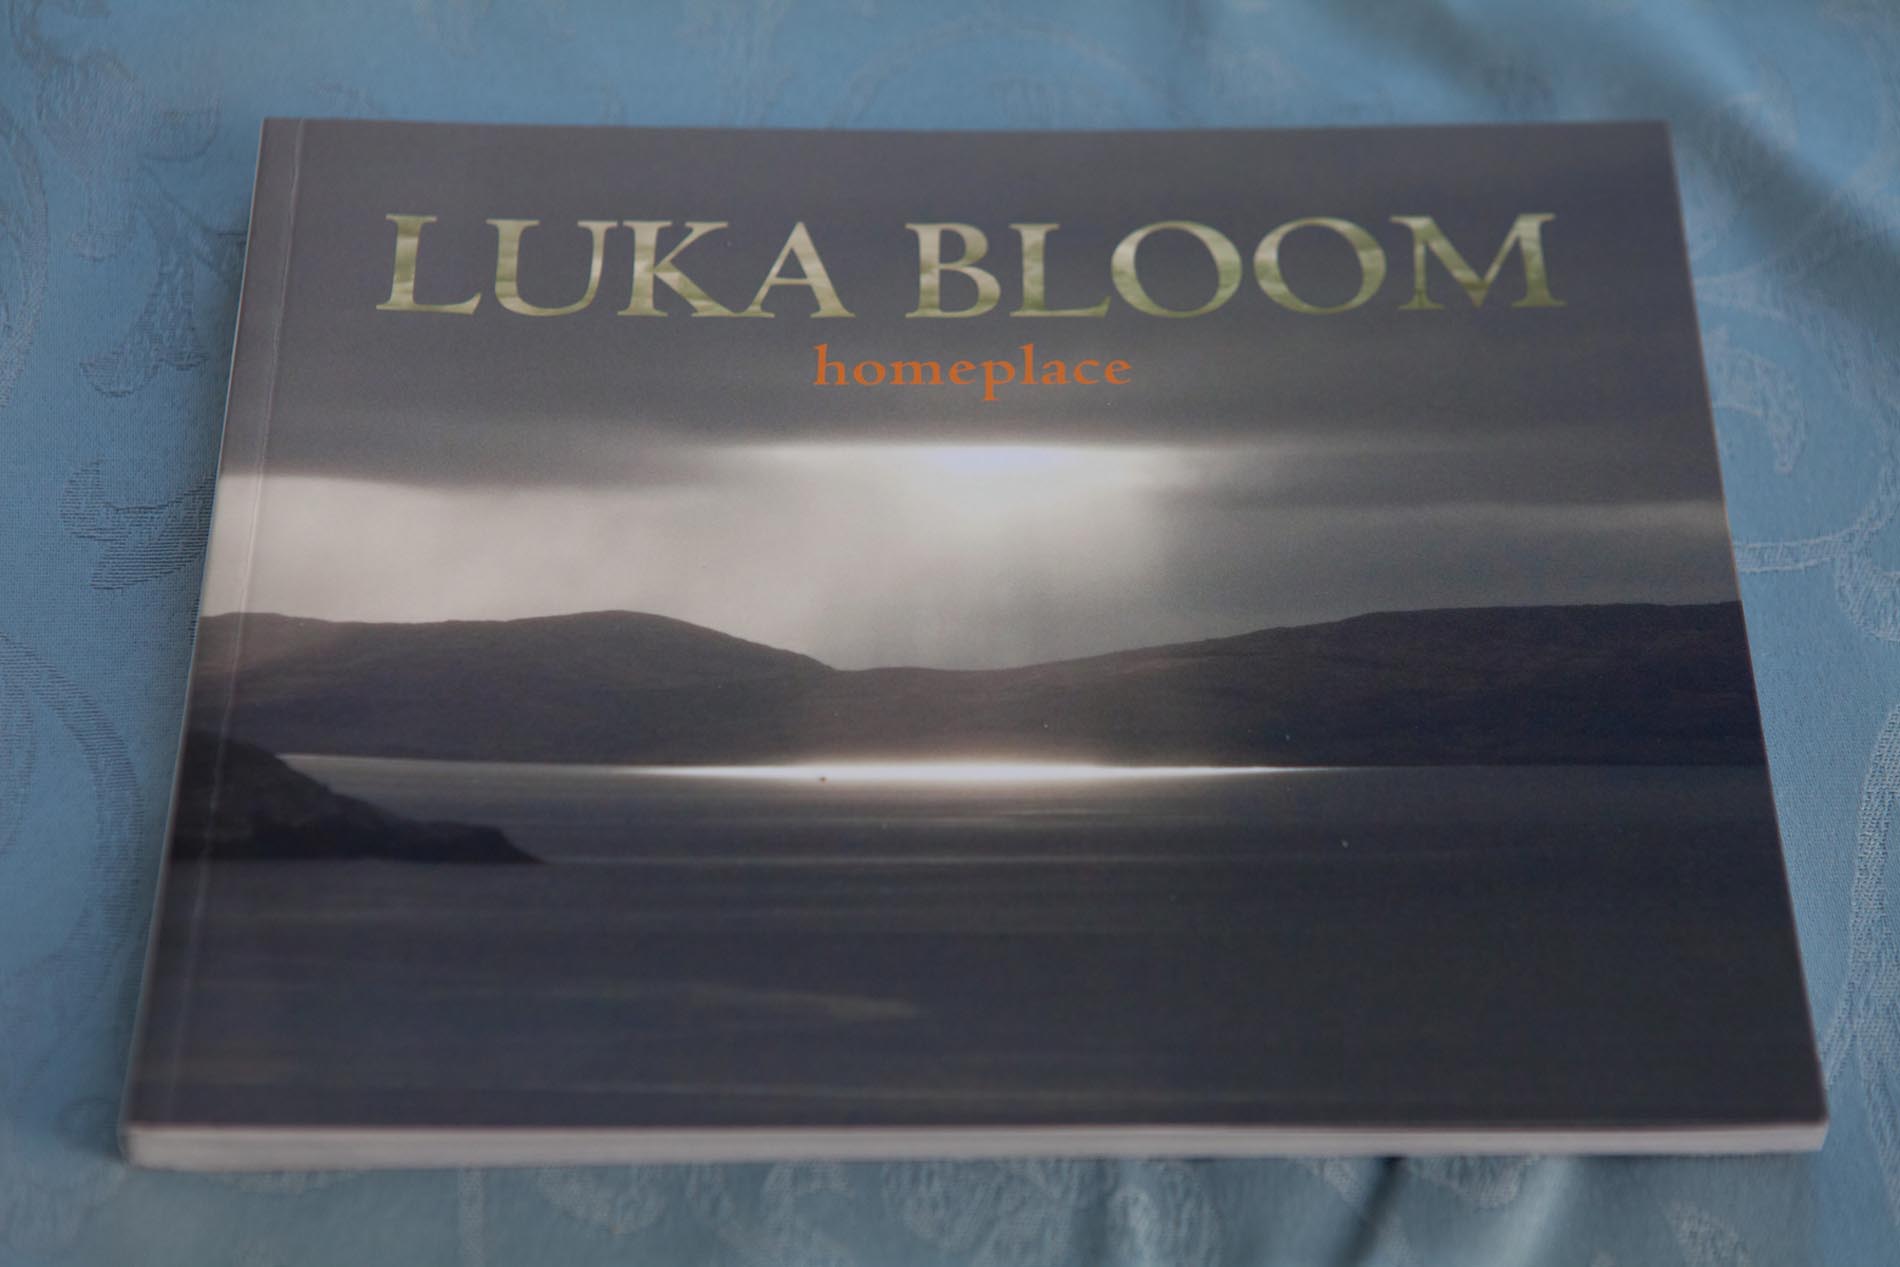 Palm Cove Photographer Nathan Kelly has his work featured in Luka Bloom